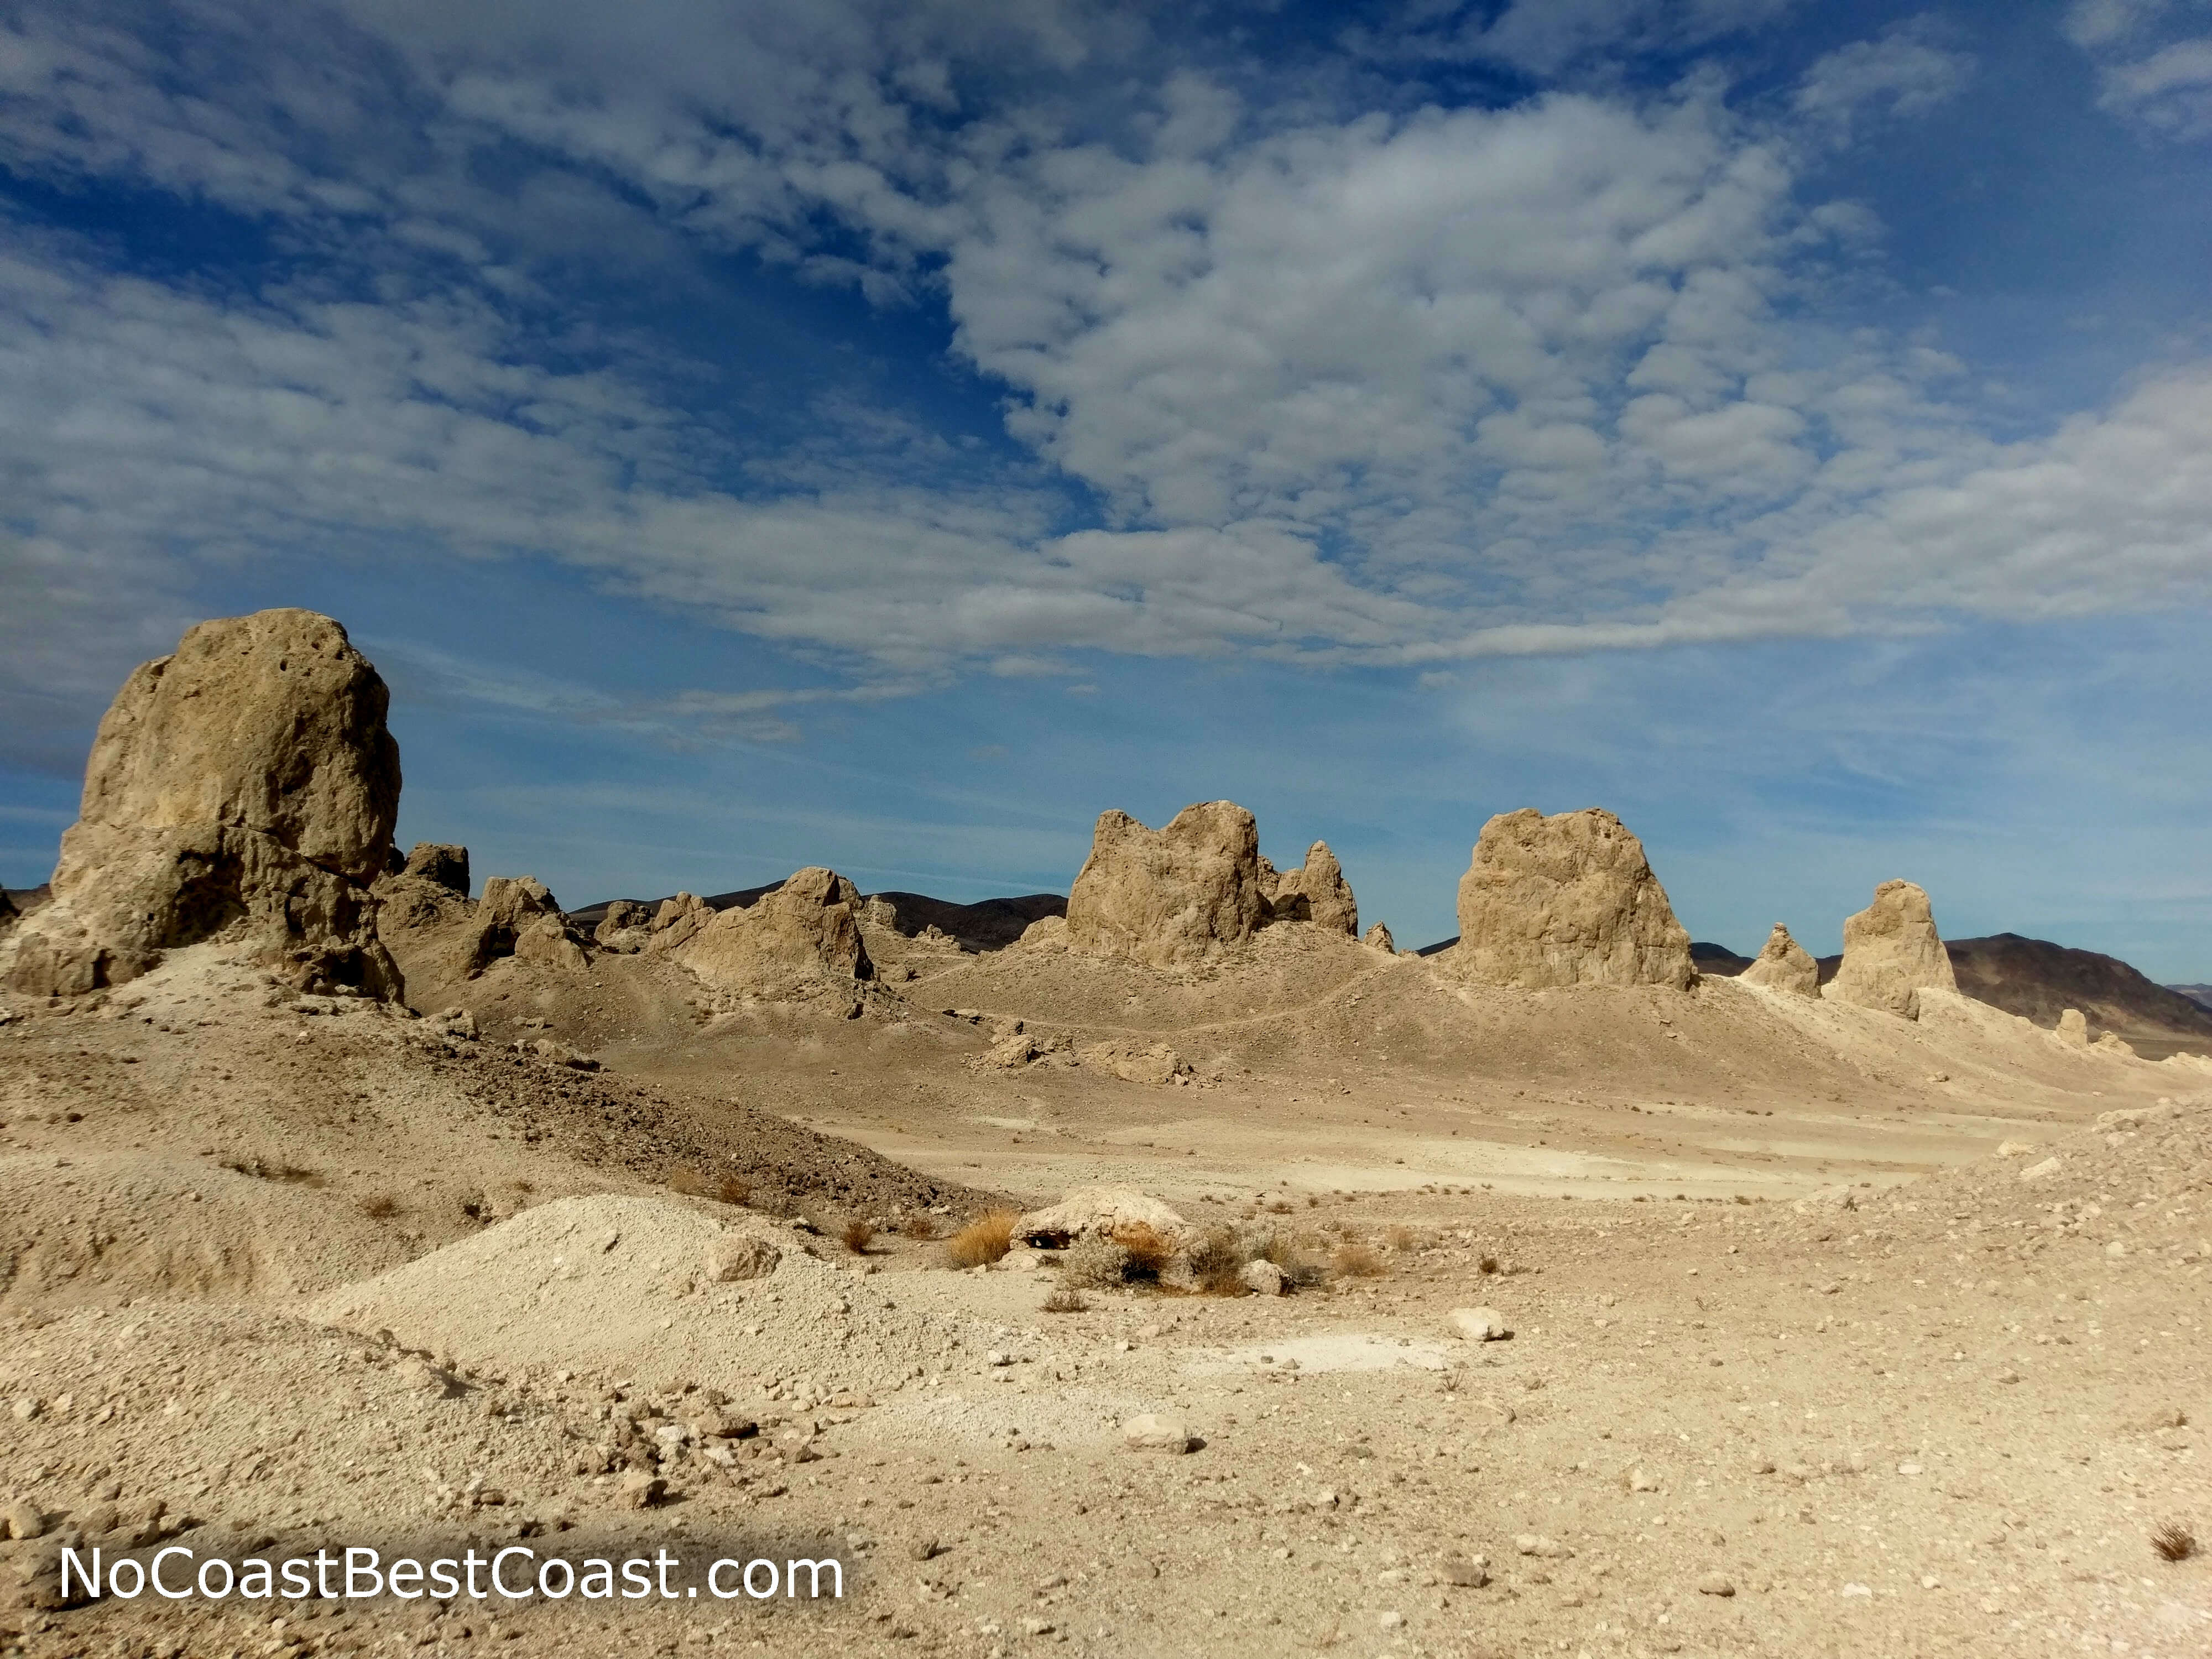 A closer view of some of the Trona Pinnacles